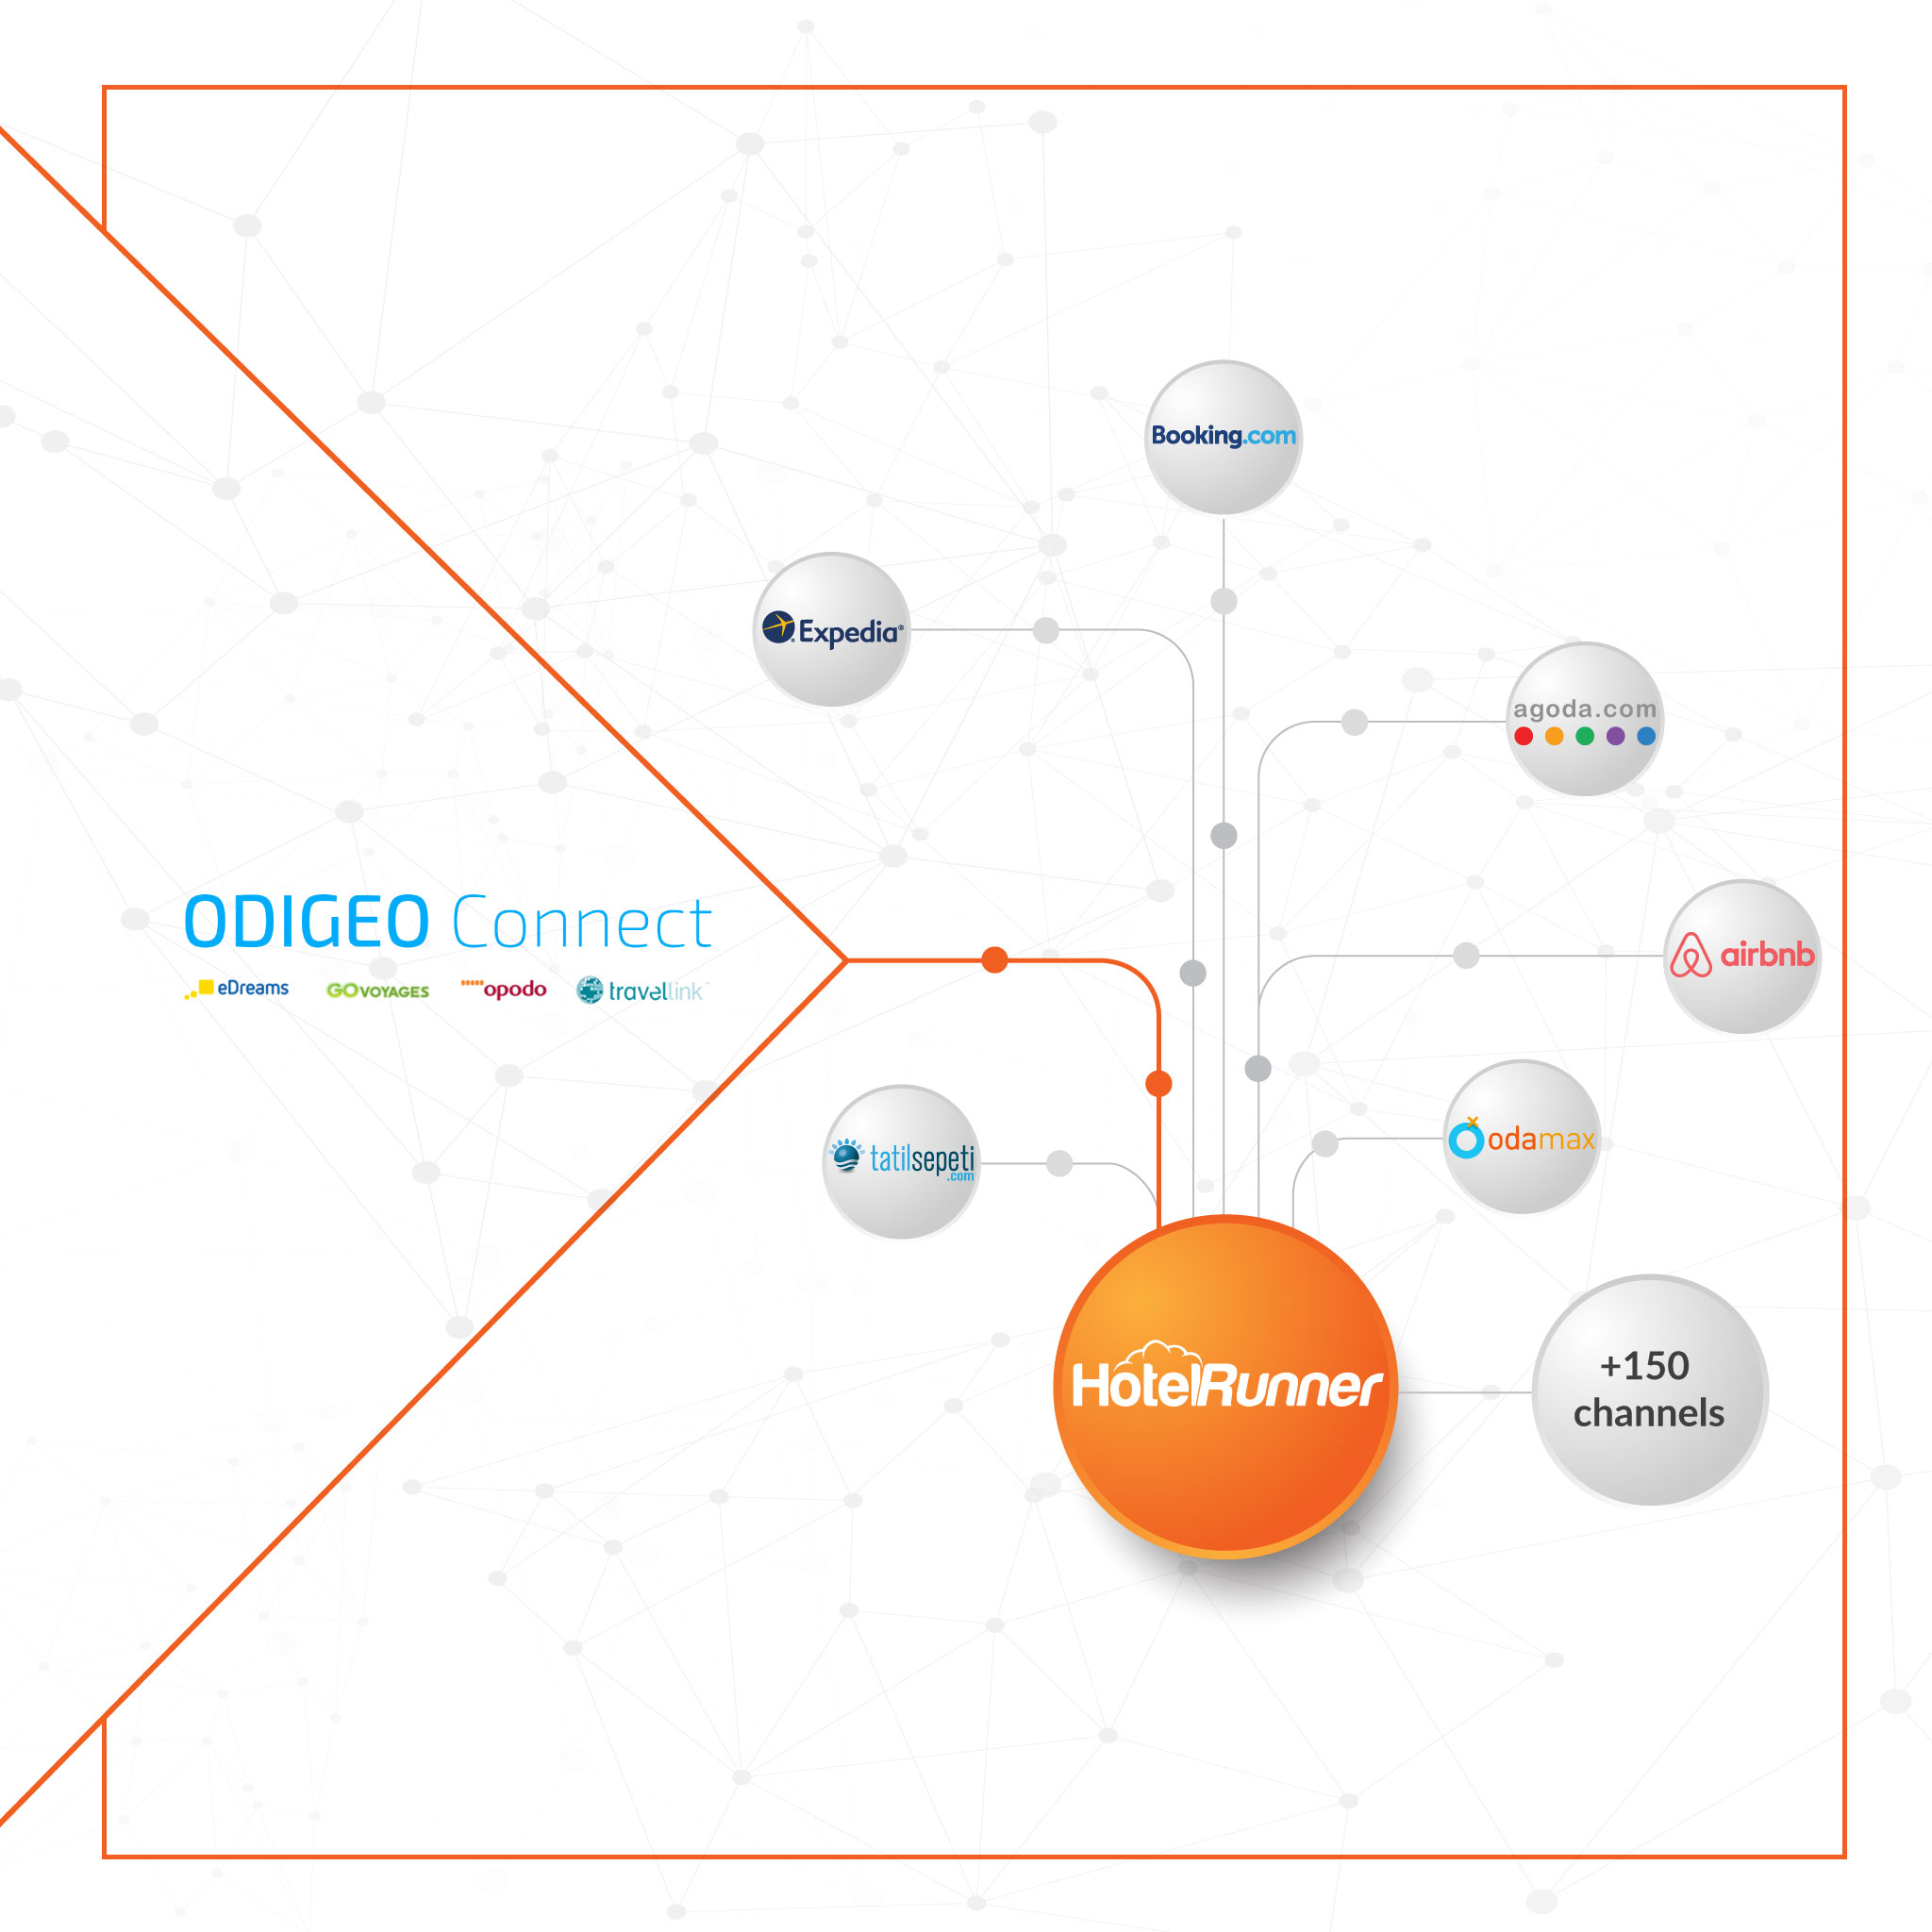 Get included in package deals with ODIGEO Connect!